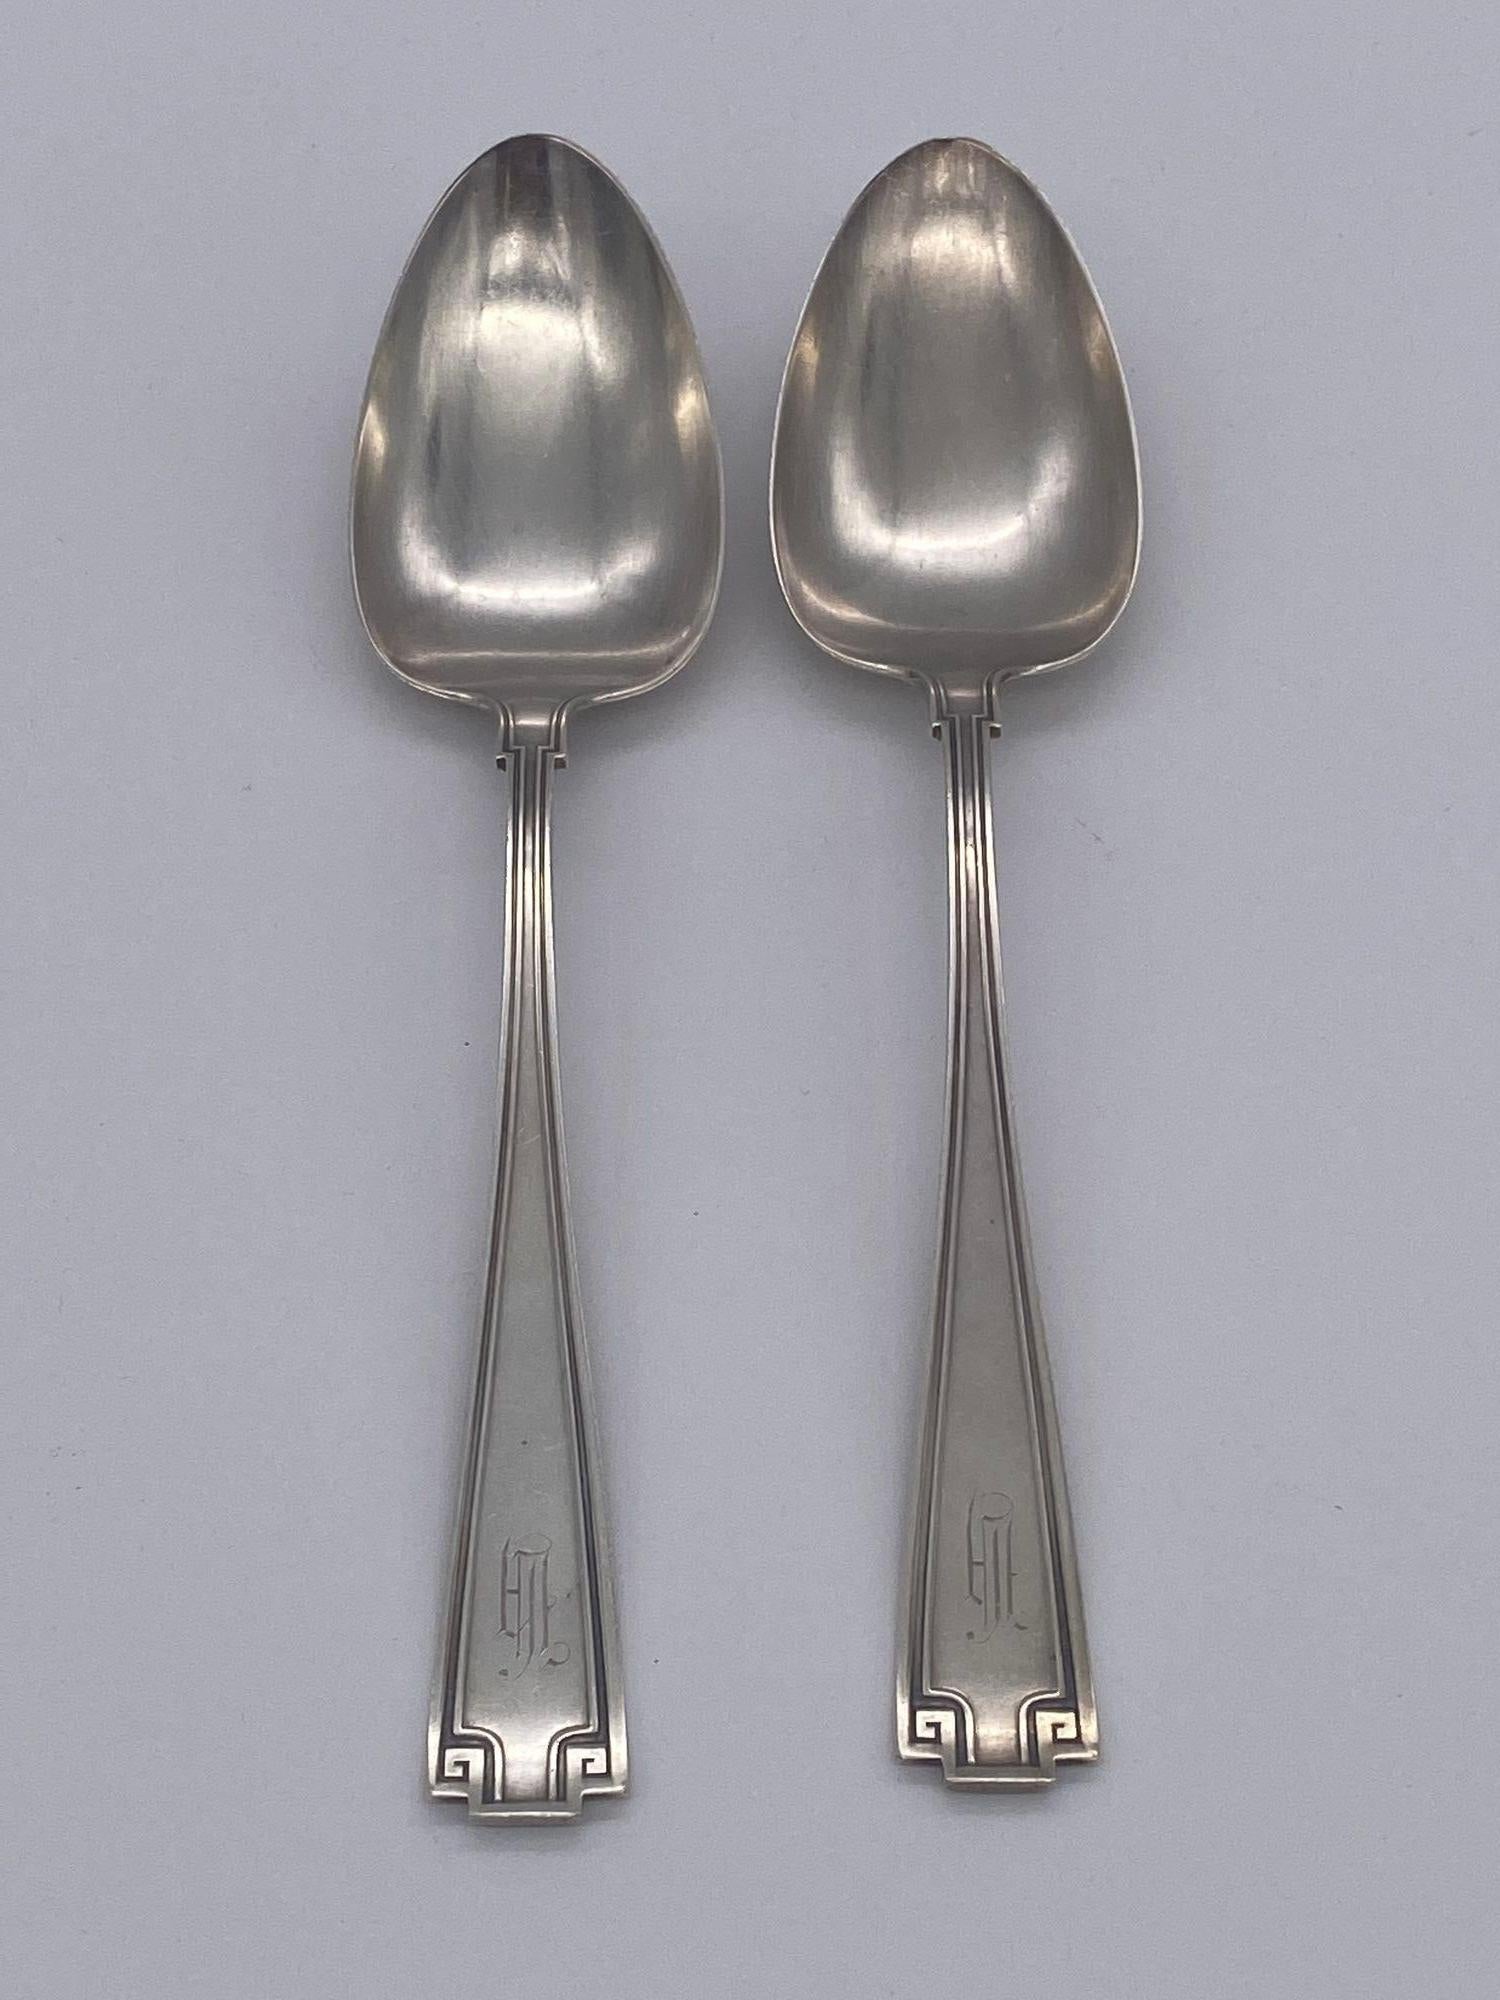 Produced from 1913 to 1991, Gorham Etruscan sterling flatware is a Greco-Roman revival pattern featuring an asymmetrical design that includes a Greek key. Although it was released in 1913, it's easy to see that Etruscan sterling silverware was a